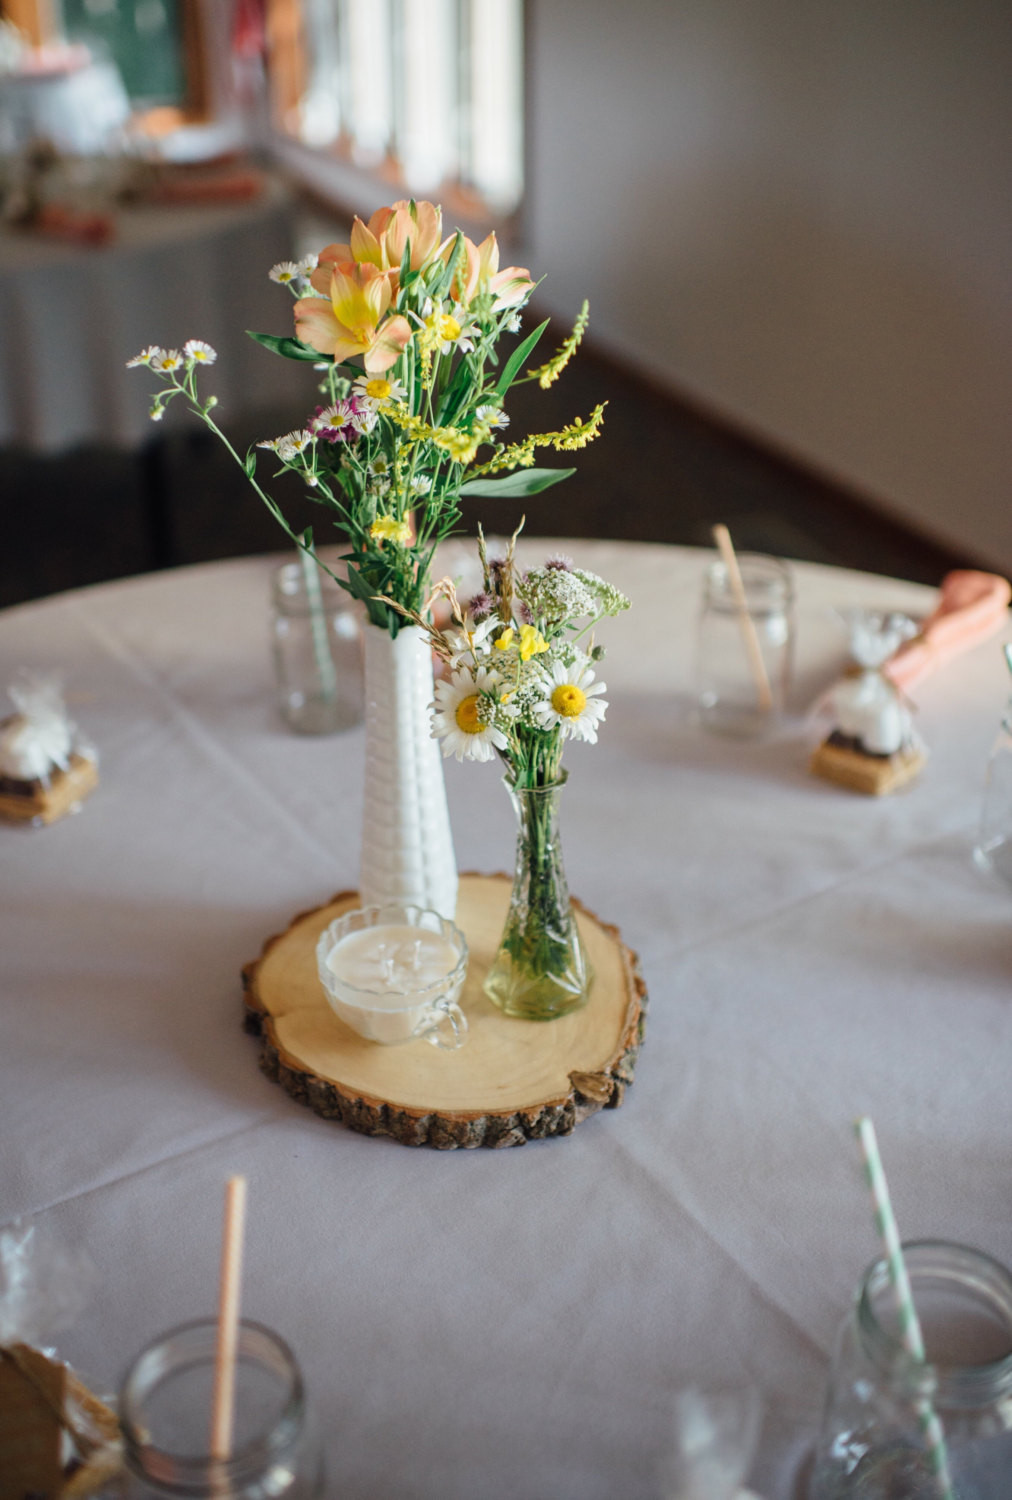 Buy Used Wedding Decor
 Wood Slices for Wedding Centerpieces Where to Buy